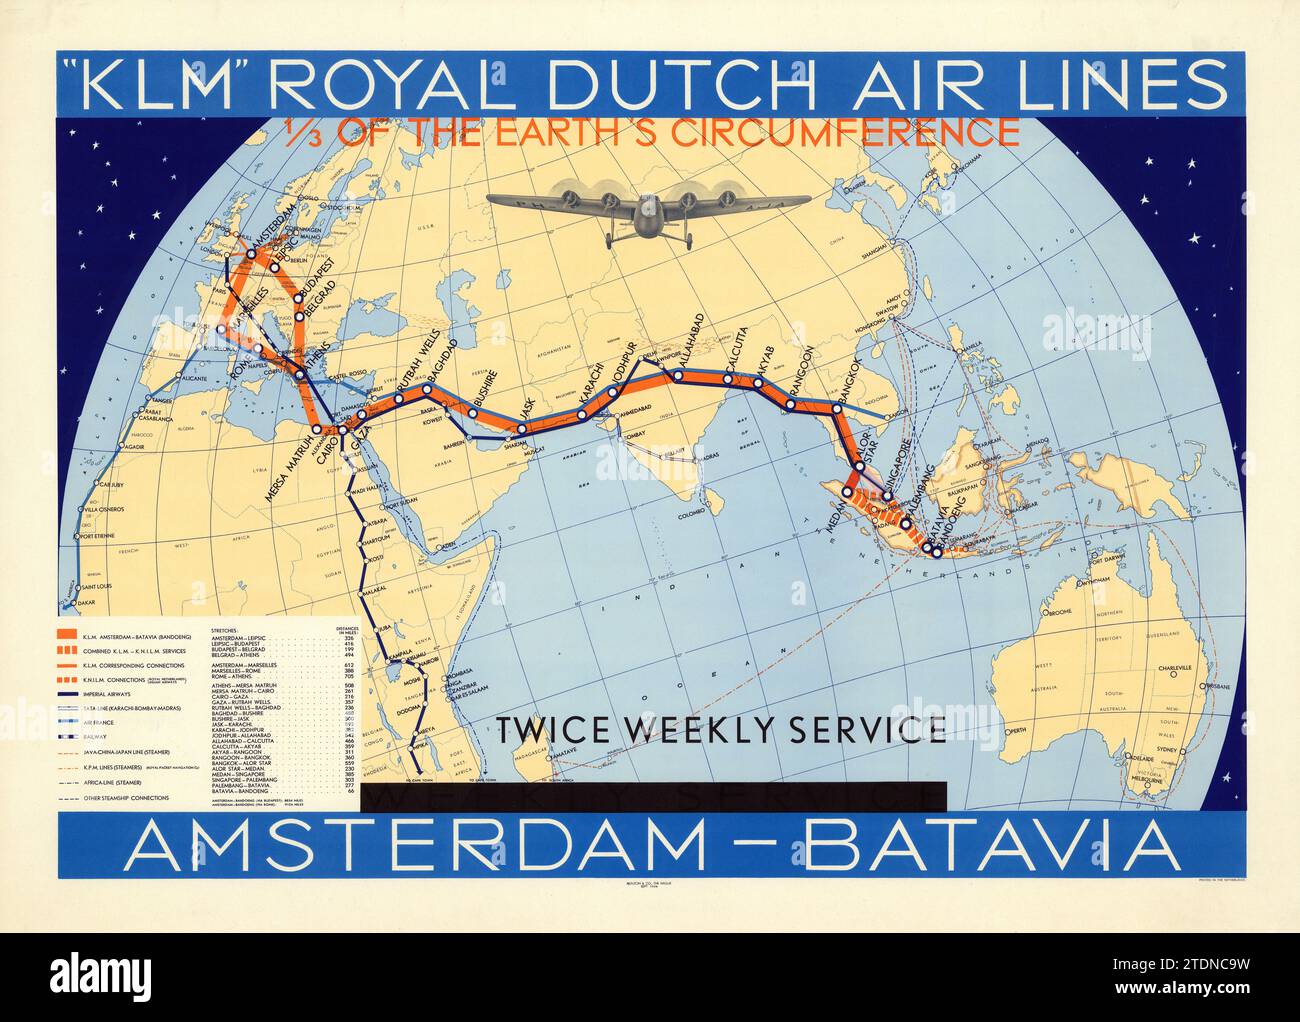 KLM Royal Dutch Airlines Amsterdam-Batavia Weekly Service 1934 - Airline poster with a map of the world. Stock Photo